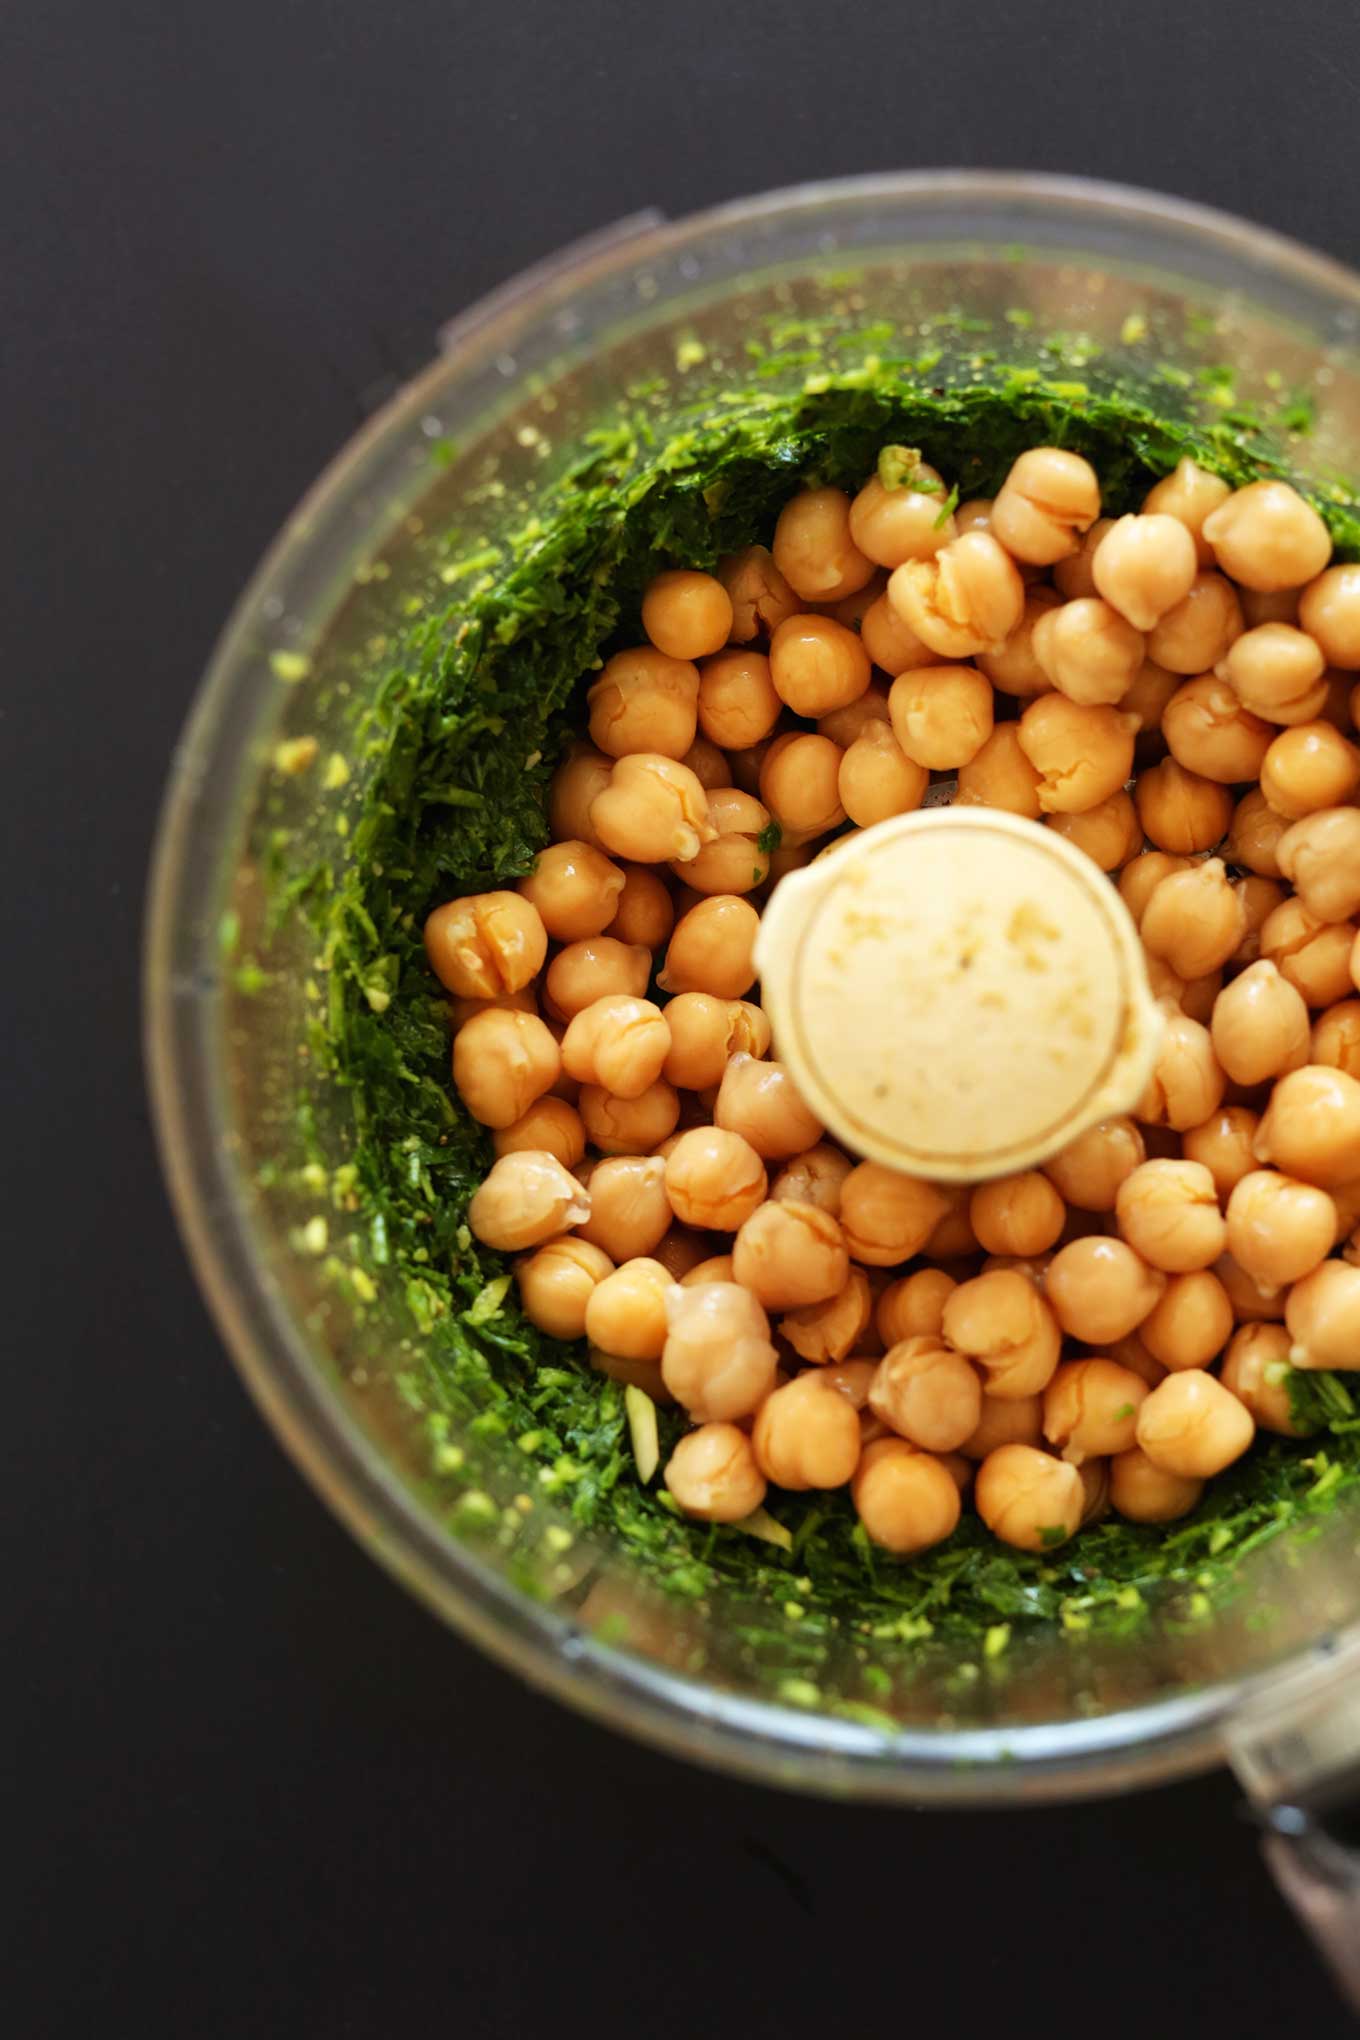 Chickpeas and greens in a food processor for making gluten-free vegan falafel